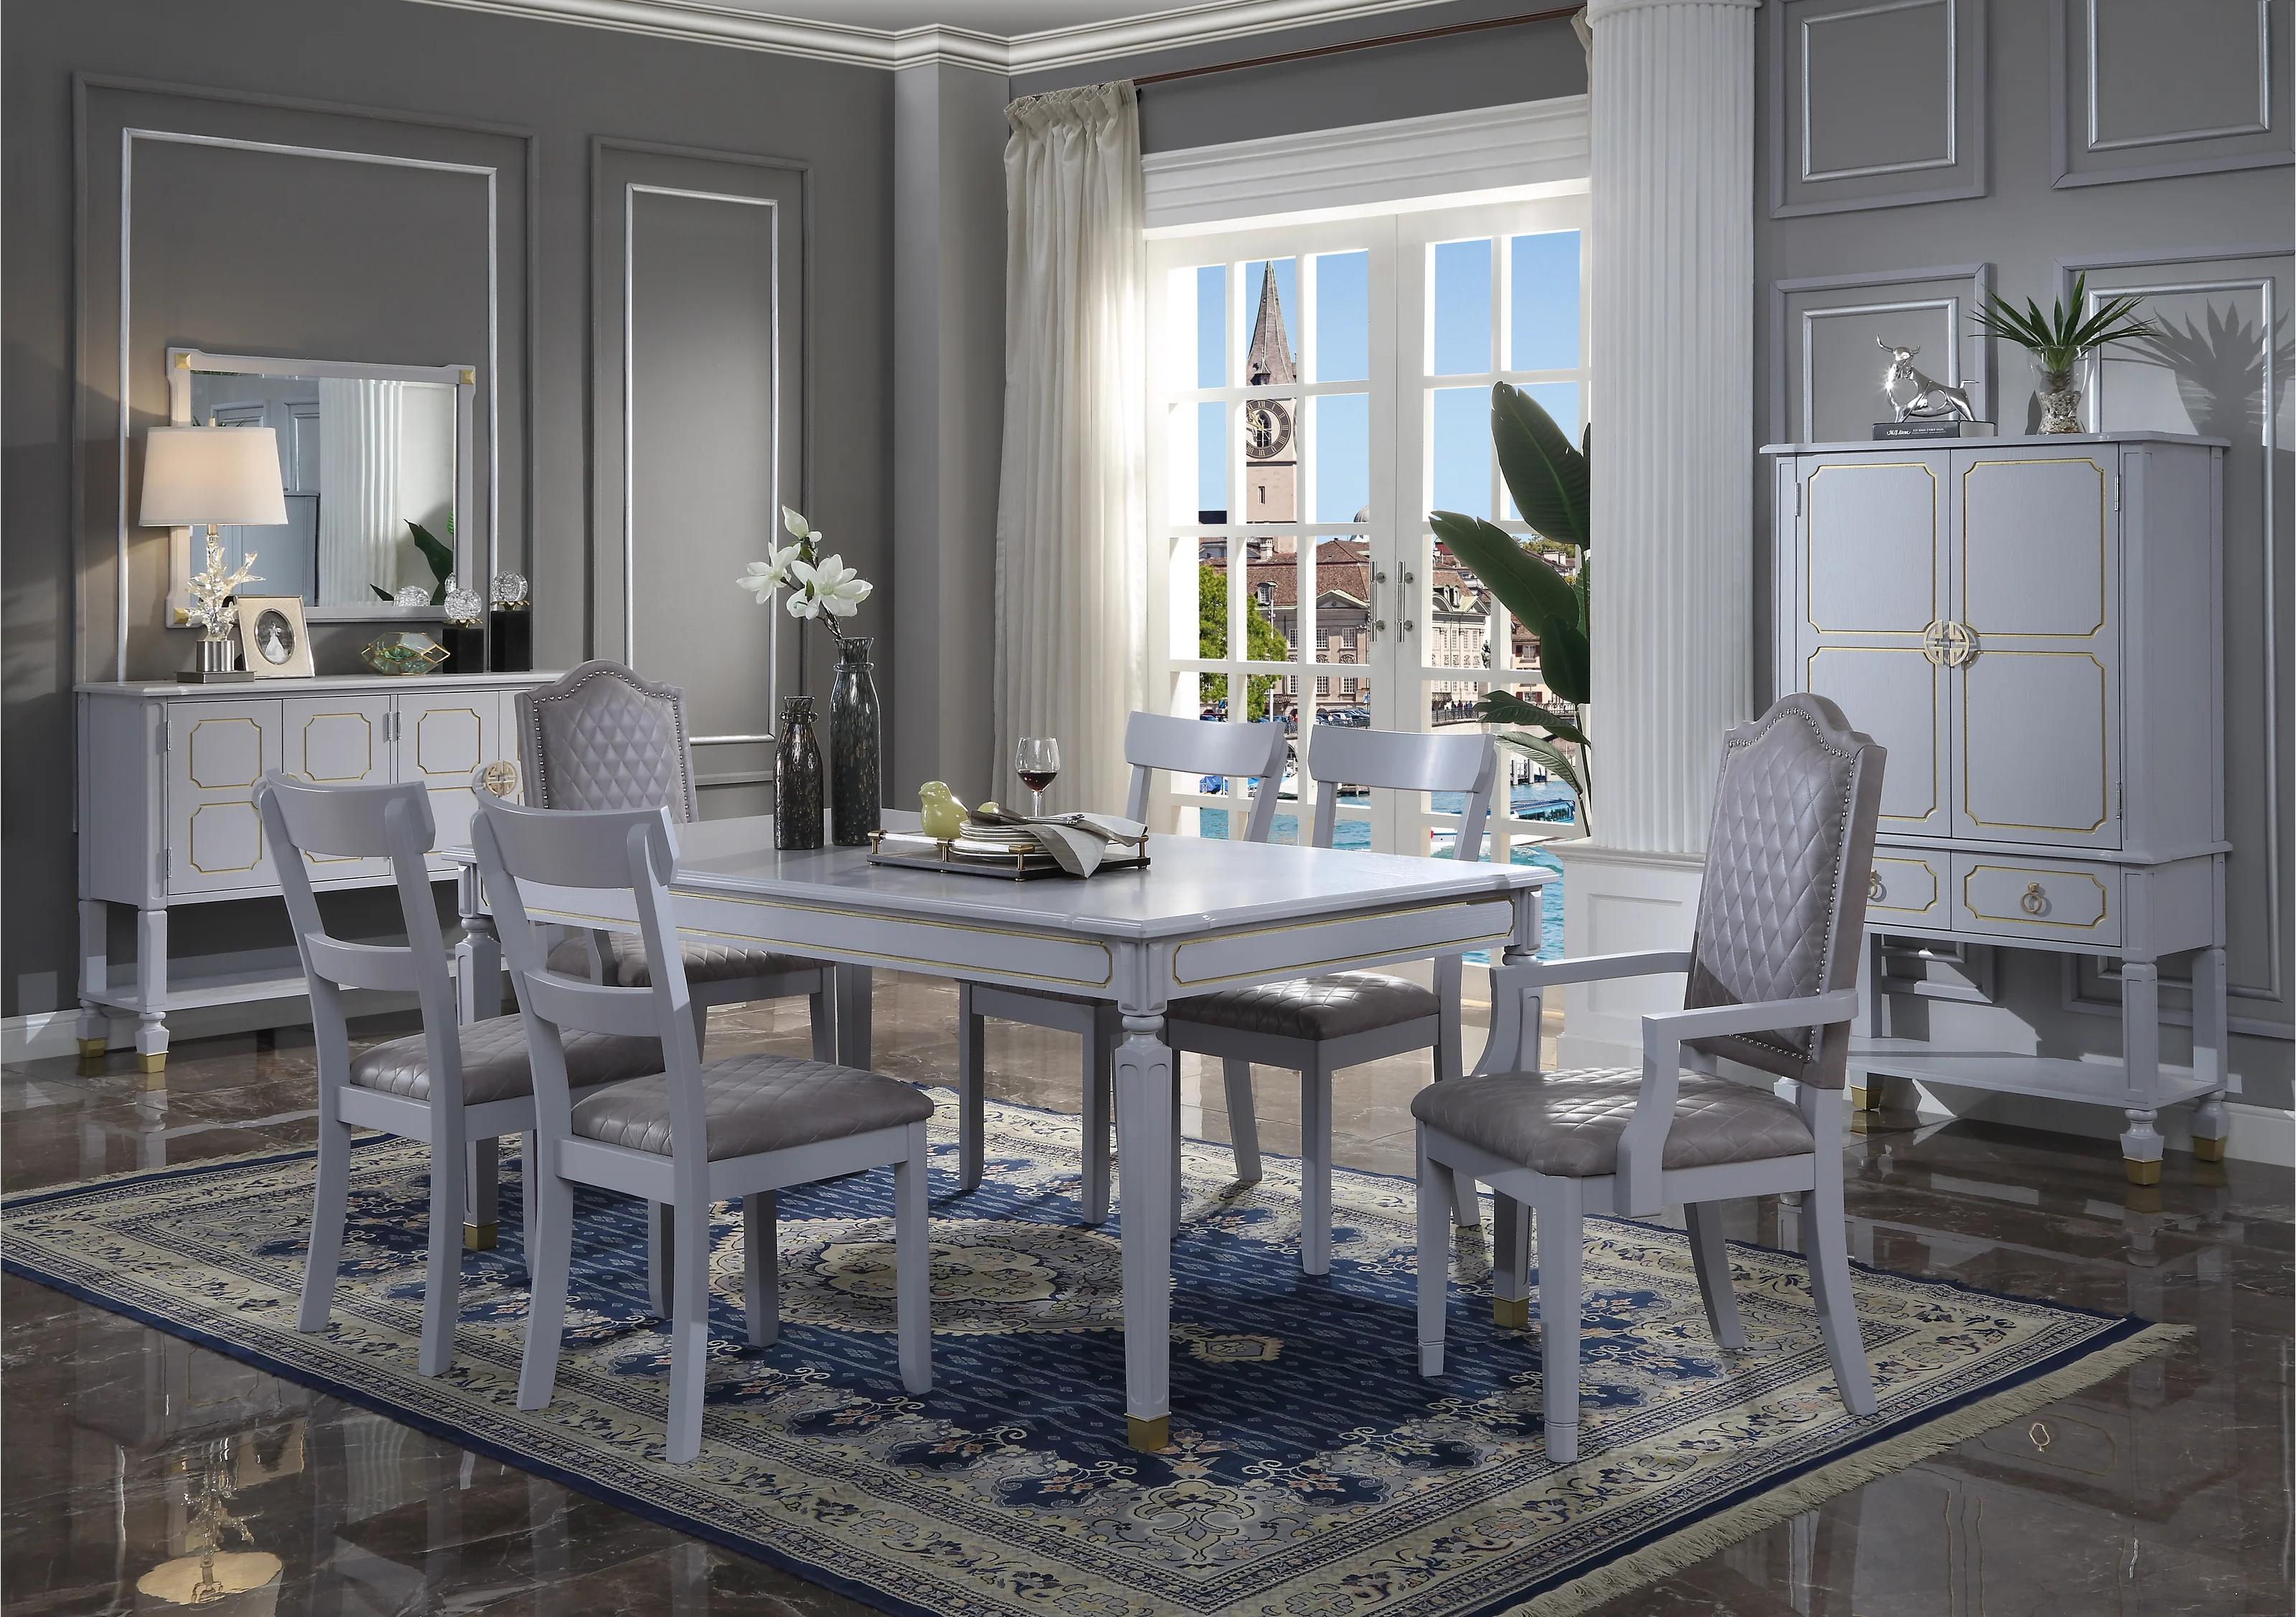 Classic Dining Room Set House Marchese 68860-9pcs in Gray Fabric